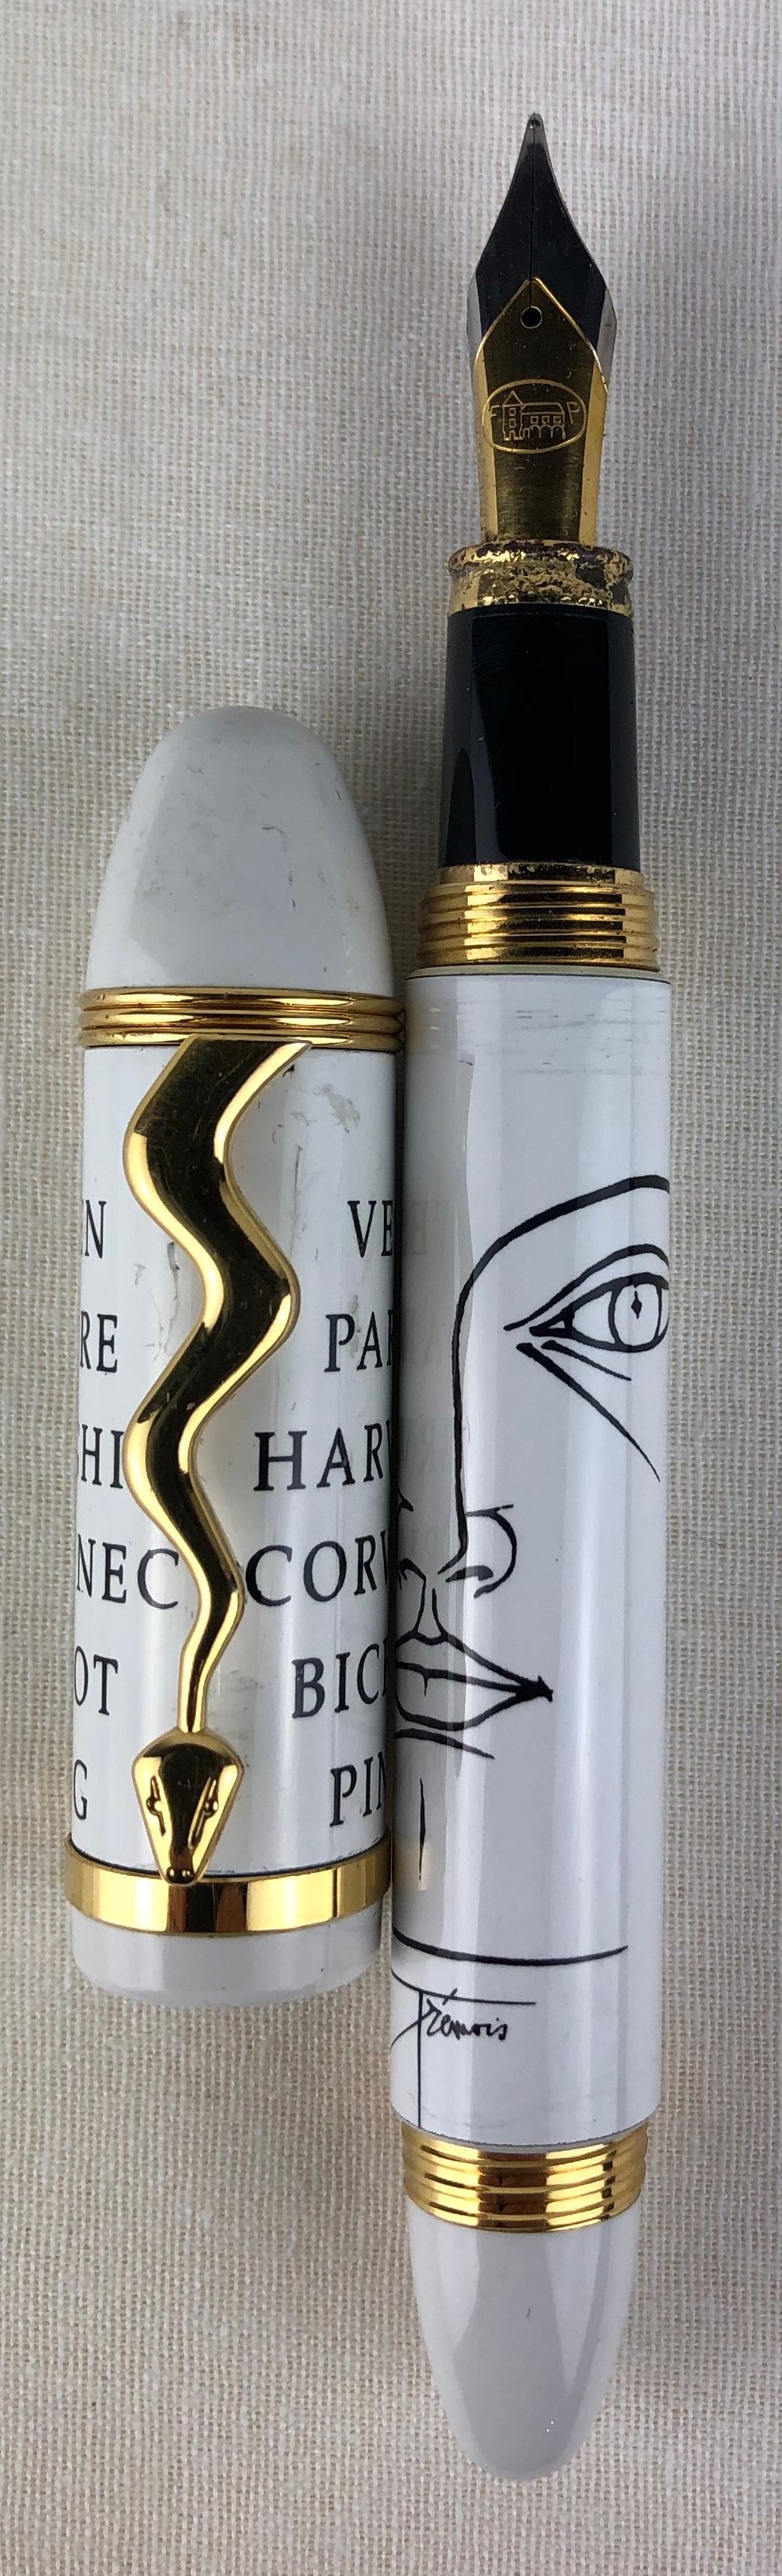 Fountain pen and ballpoint pen by the artist Trémois (Rare!). This pen is made by the same manufacturers as the Montblanc pens. Gold nib. White lacquer and gold-plated. Himalaya model. First edition. Numbered. Limited edition of 1000 copies.